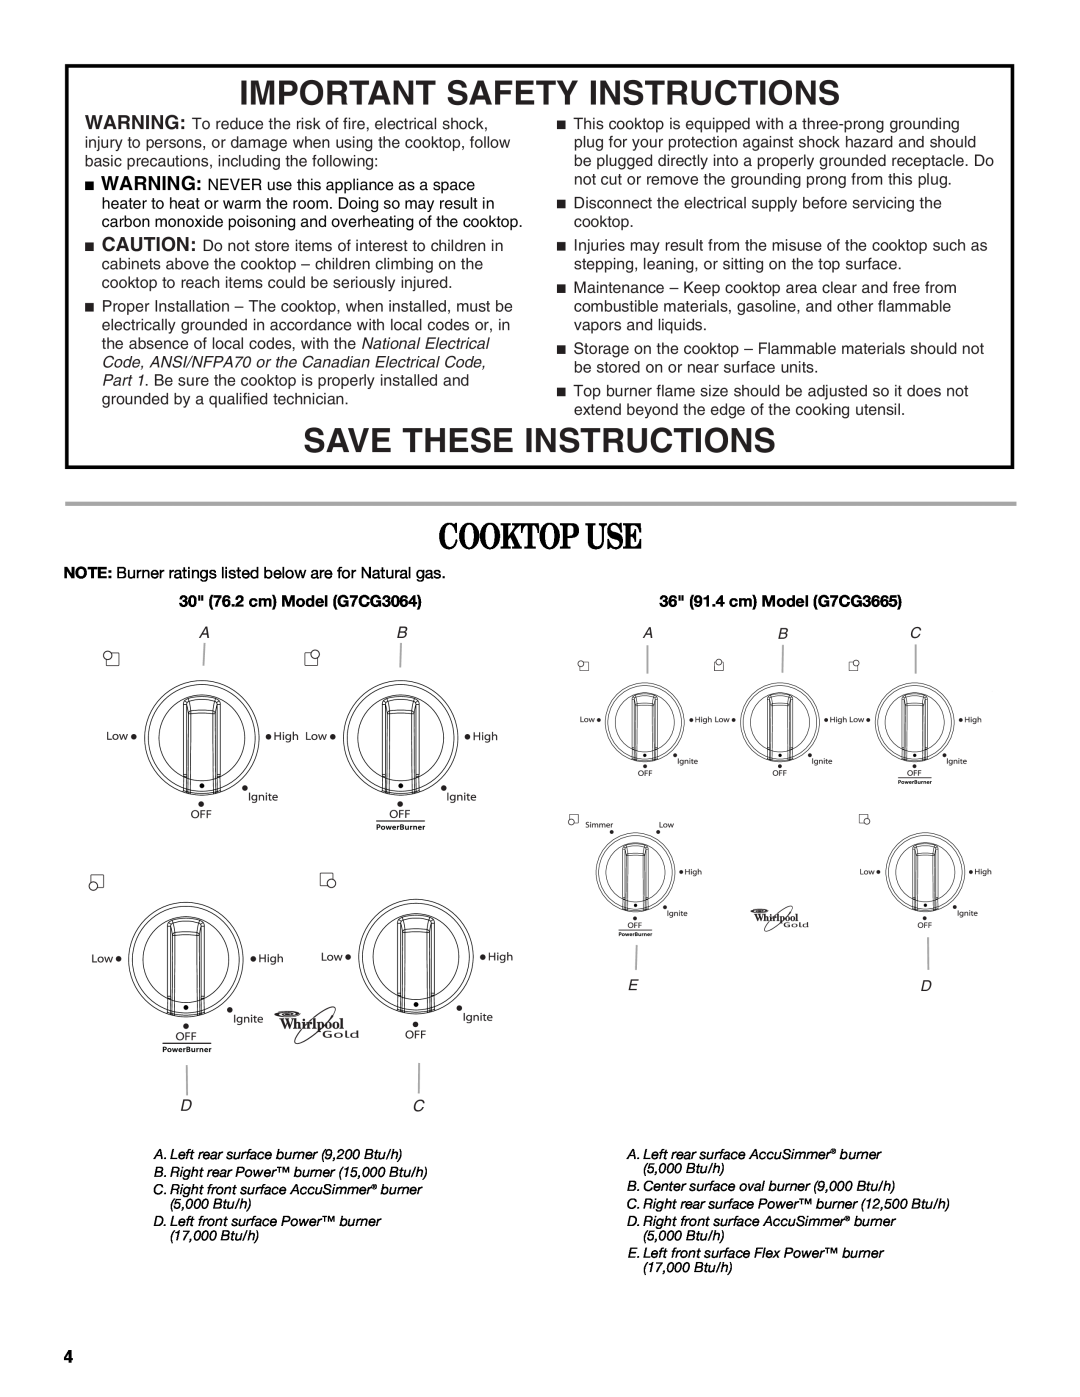 Whirlpool W5CG3625, G7CG3064XS, W5CG3024 manual Cooktop Use, Important Safety Instructions, Save These Instructions, Ab Dc 